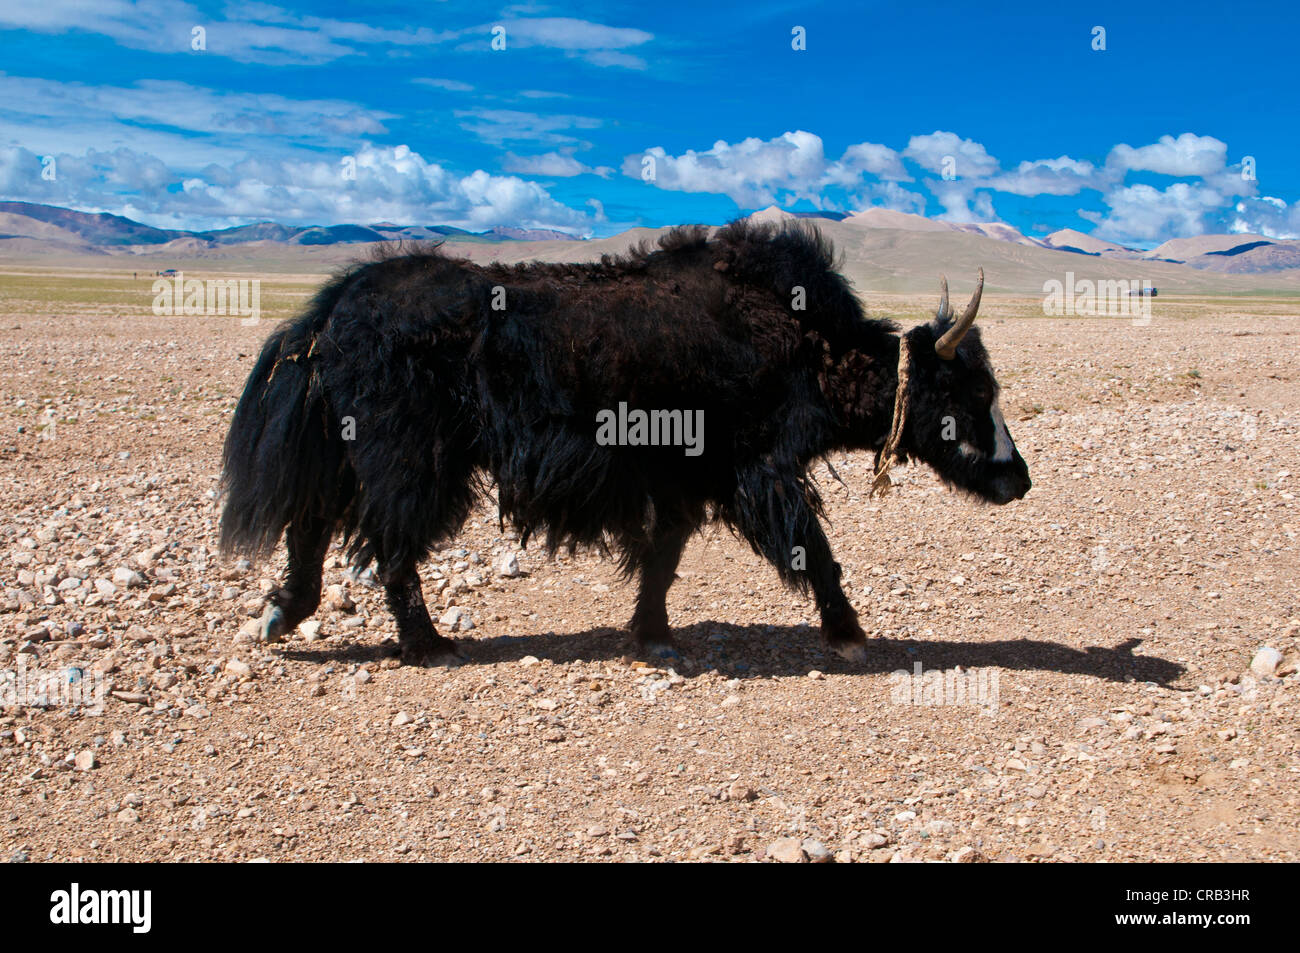 Yak in the wide open Tibetan landscape along the road from Tsochen to Lhasa, Western Tibet, Tibet, Asia Stock Photo